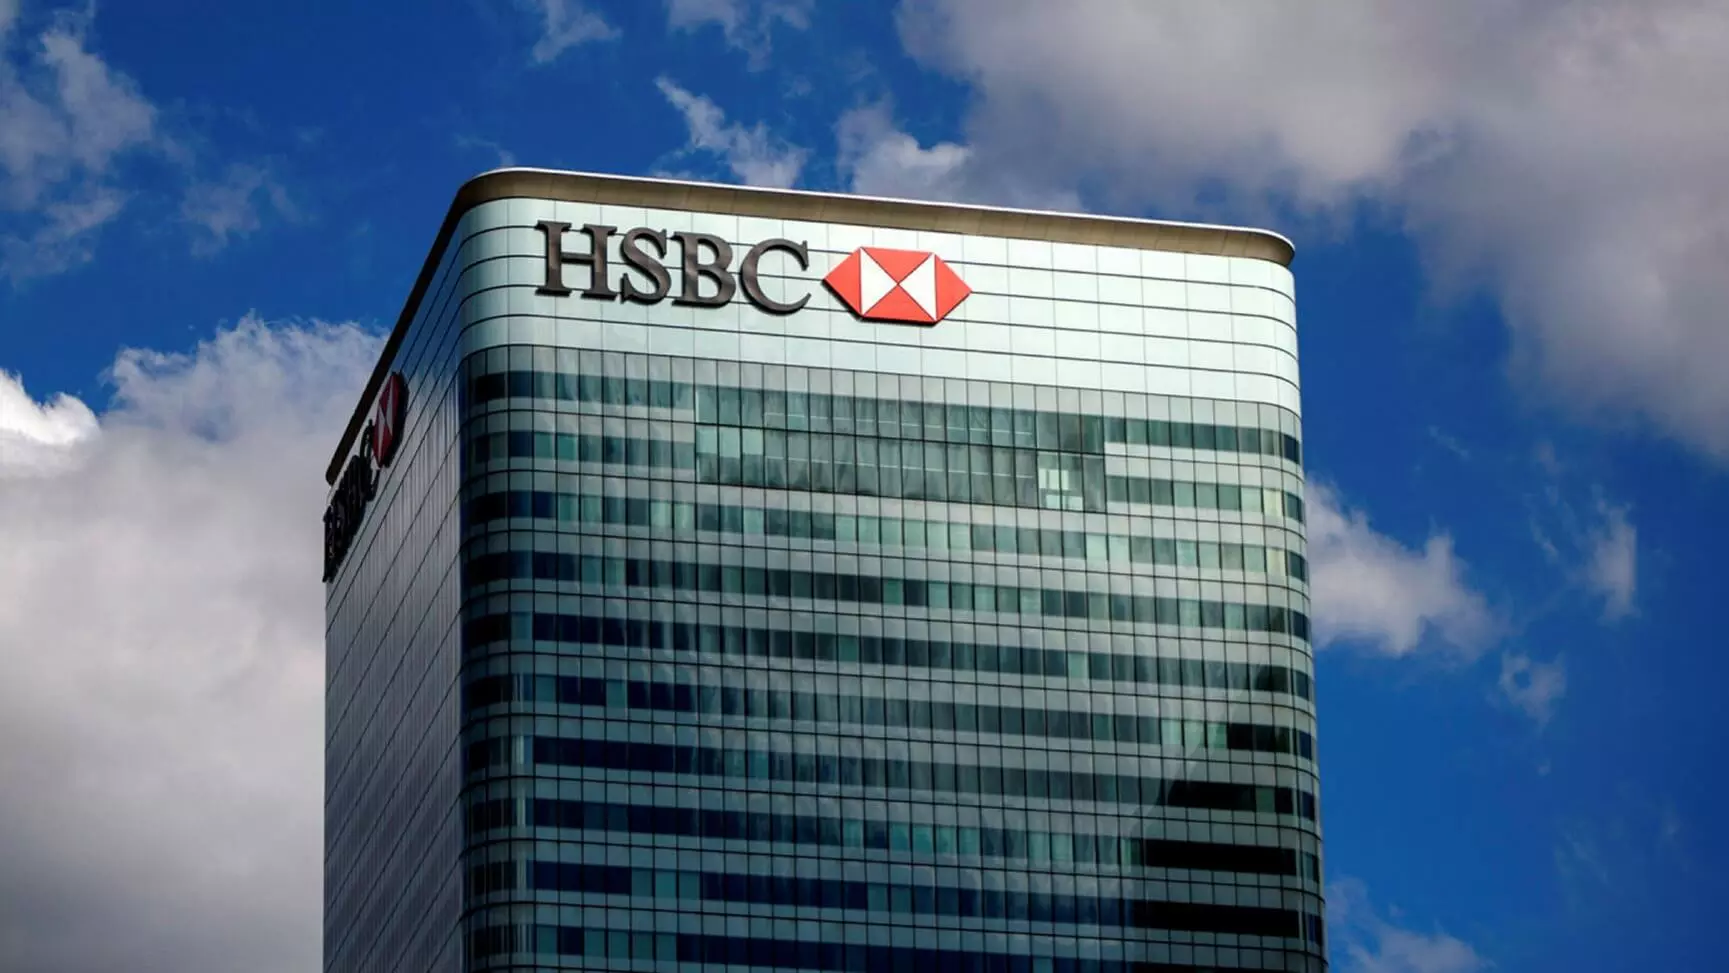 HSBC Net Zero Adverts Banned For Misleading Consumers